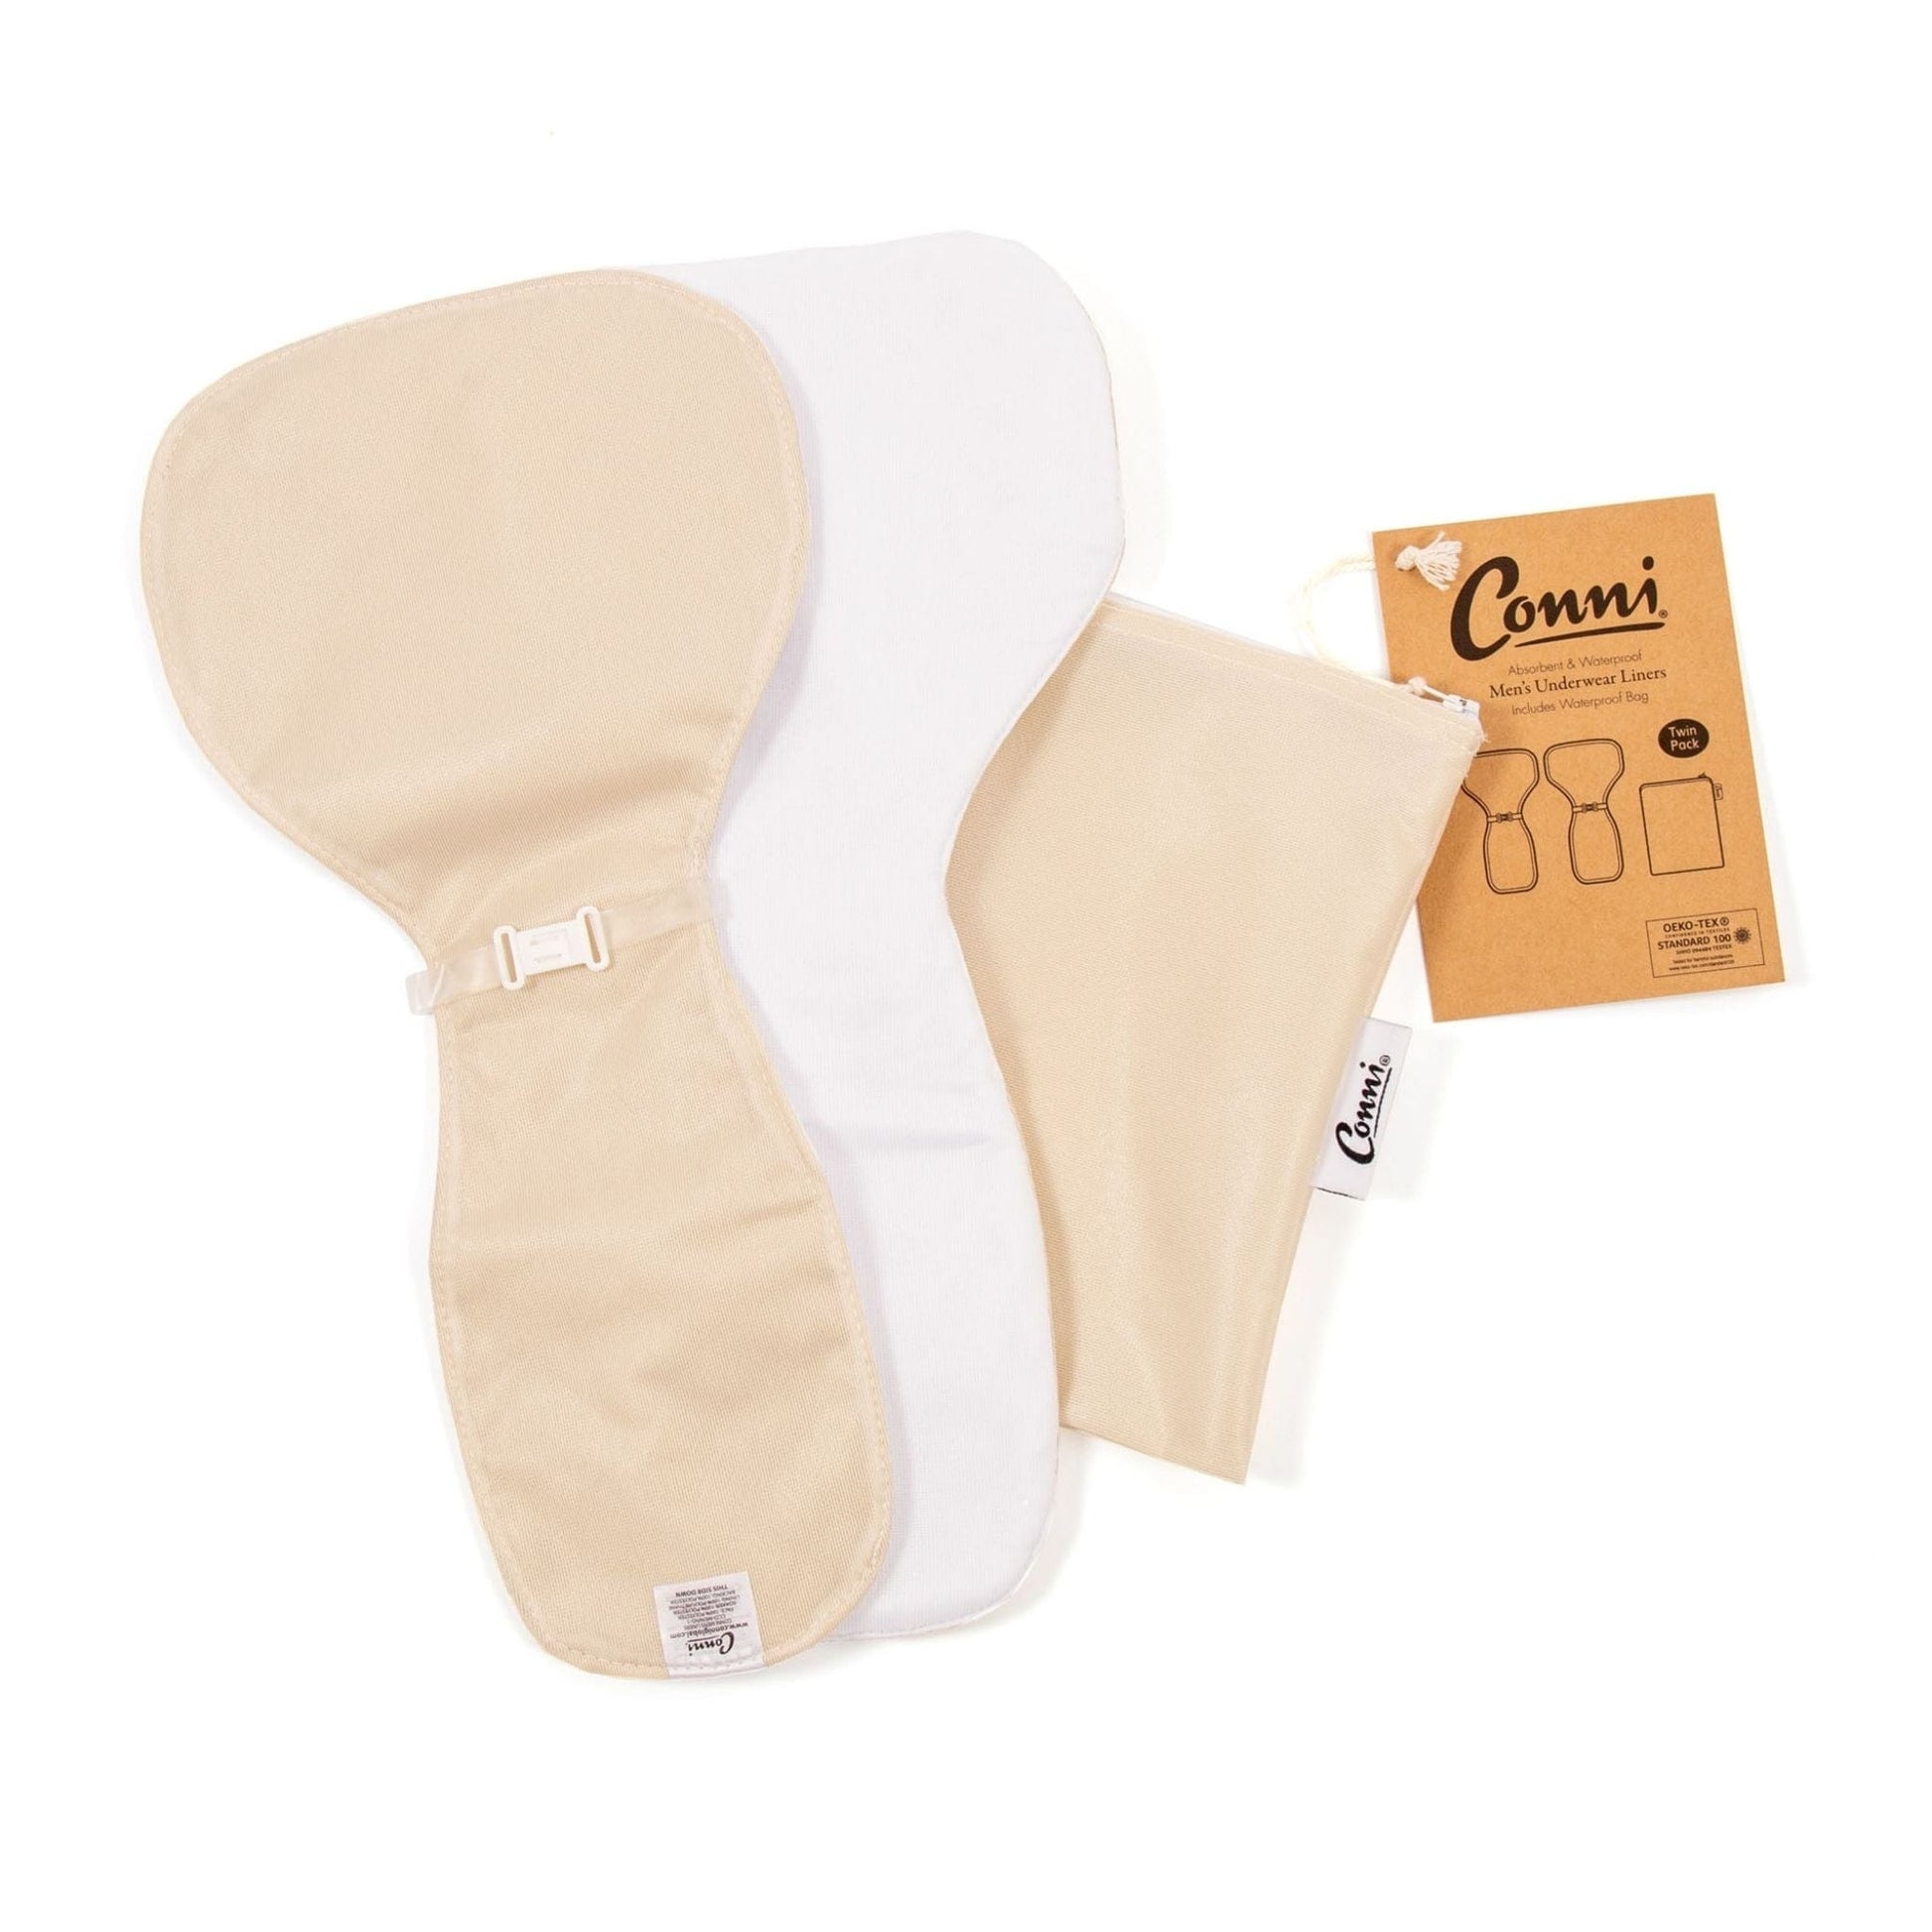 Men's Incontinence Pads - Caring Clothing